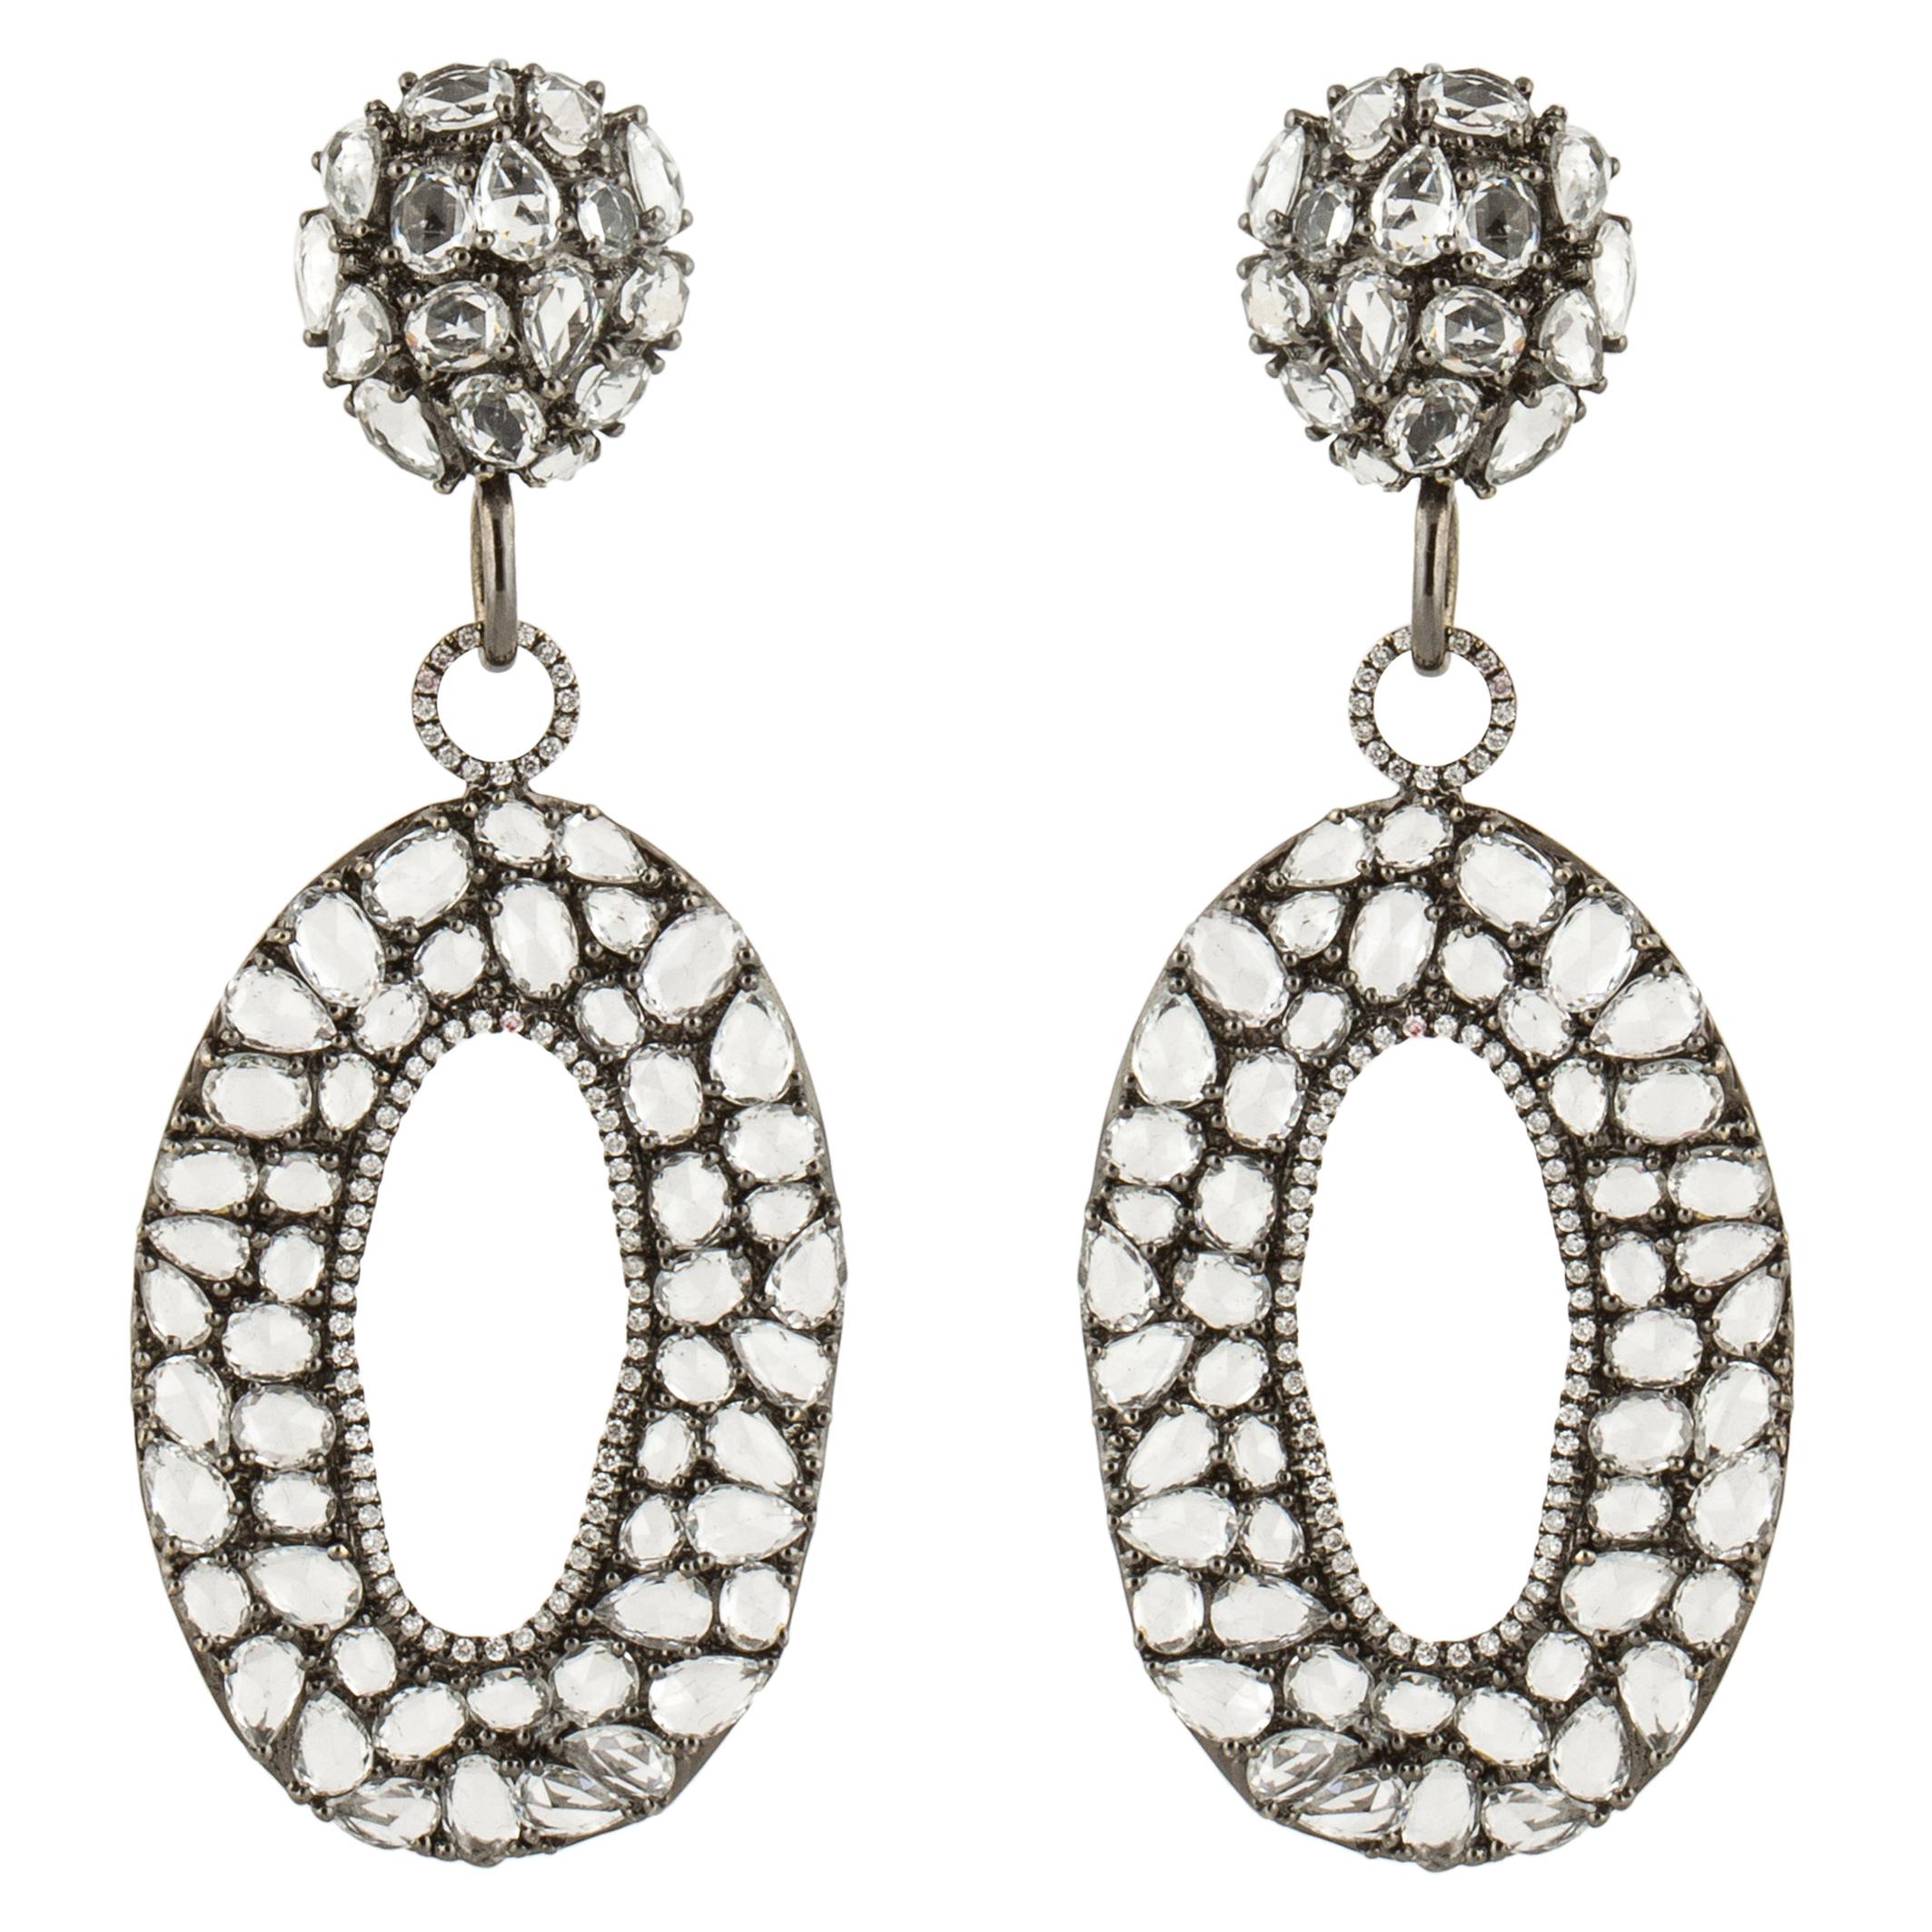 18K Blackened Gold Statement Earrings with White Topaz and Diamonds